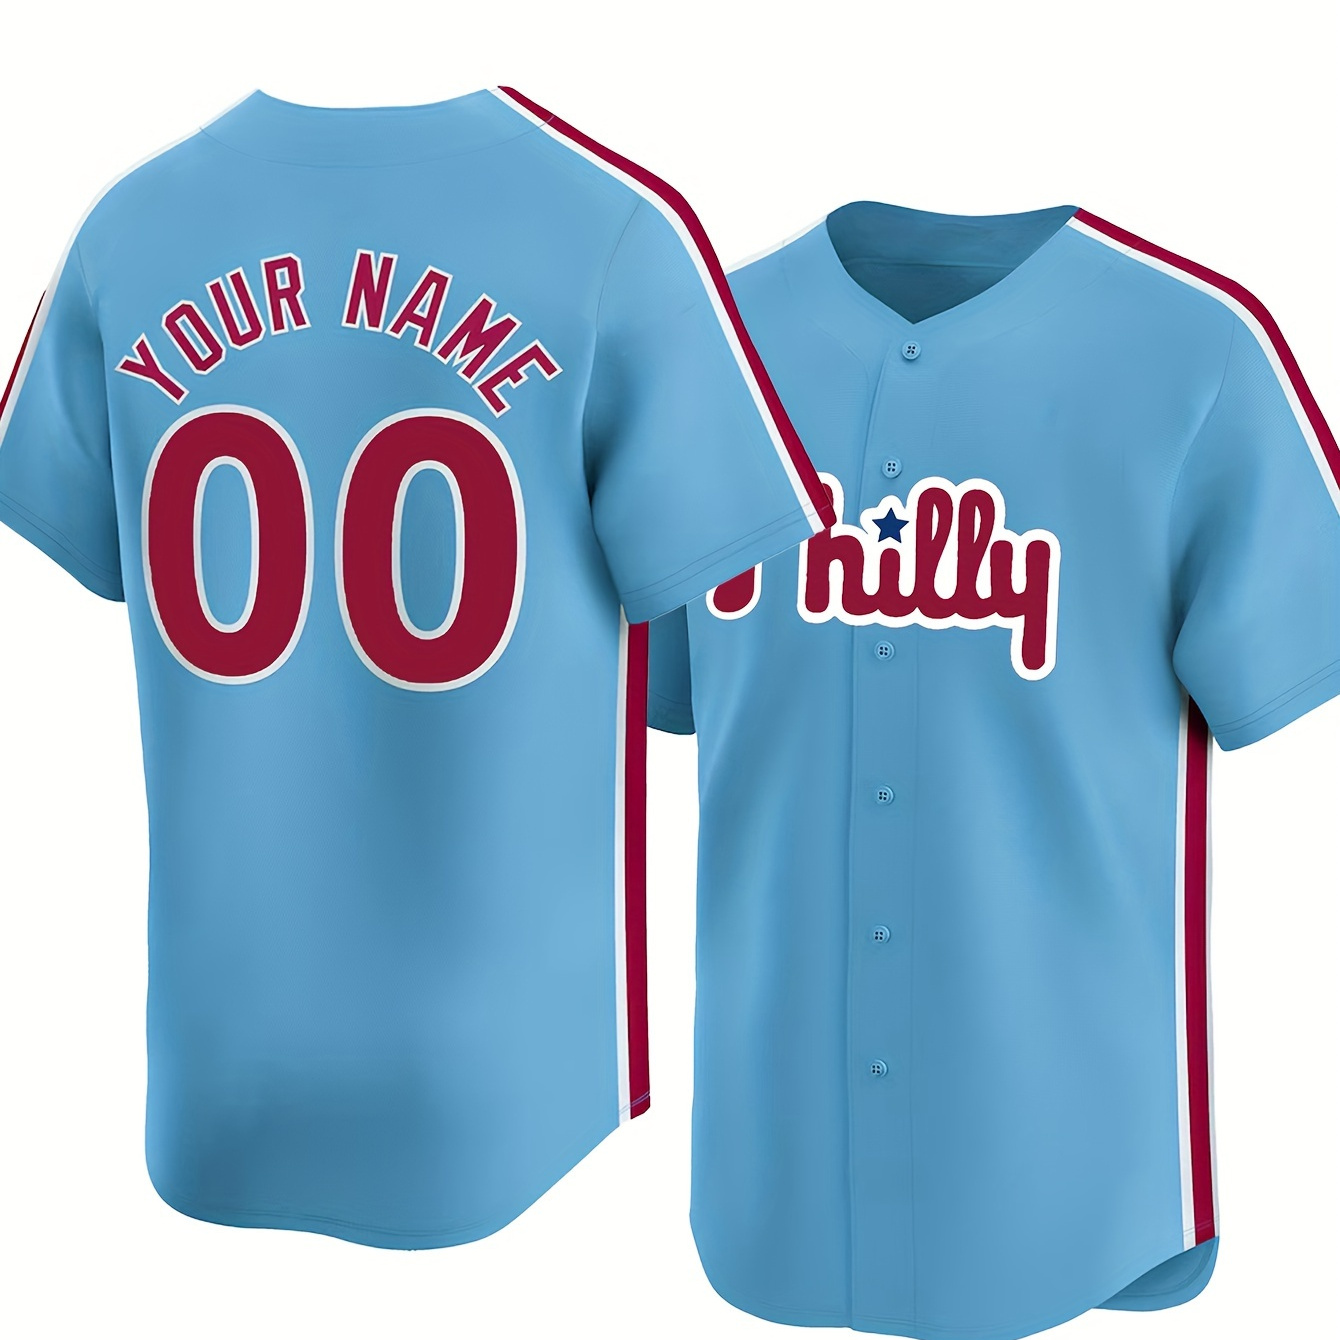 

Men's Customized Name & Number Color Block Baseball Jersey, Tailored To Your Preference, Comfy Top For Summer Sport